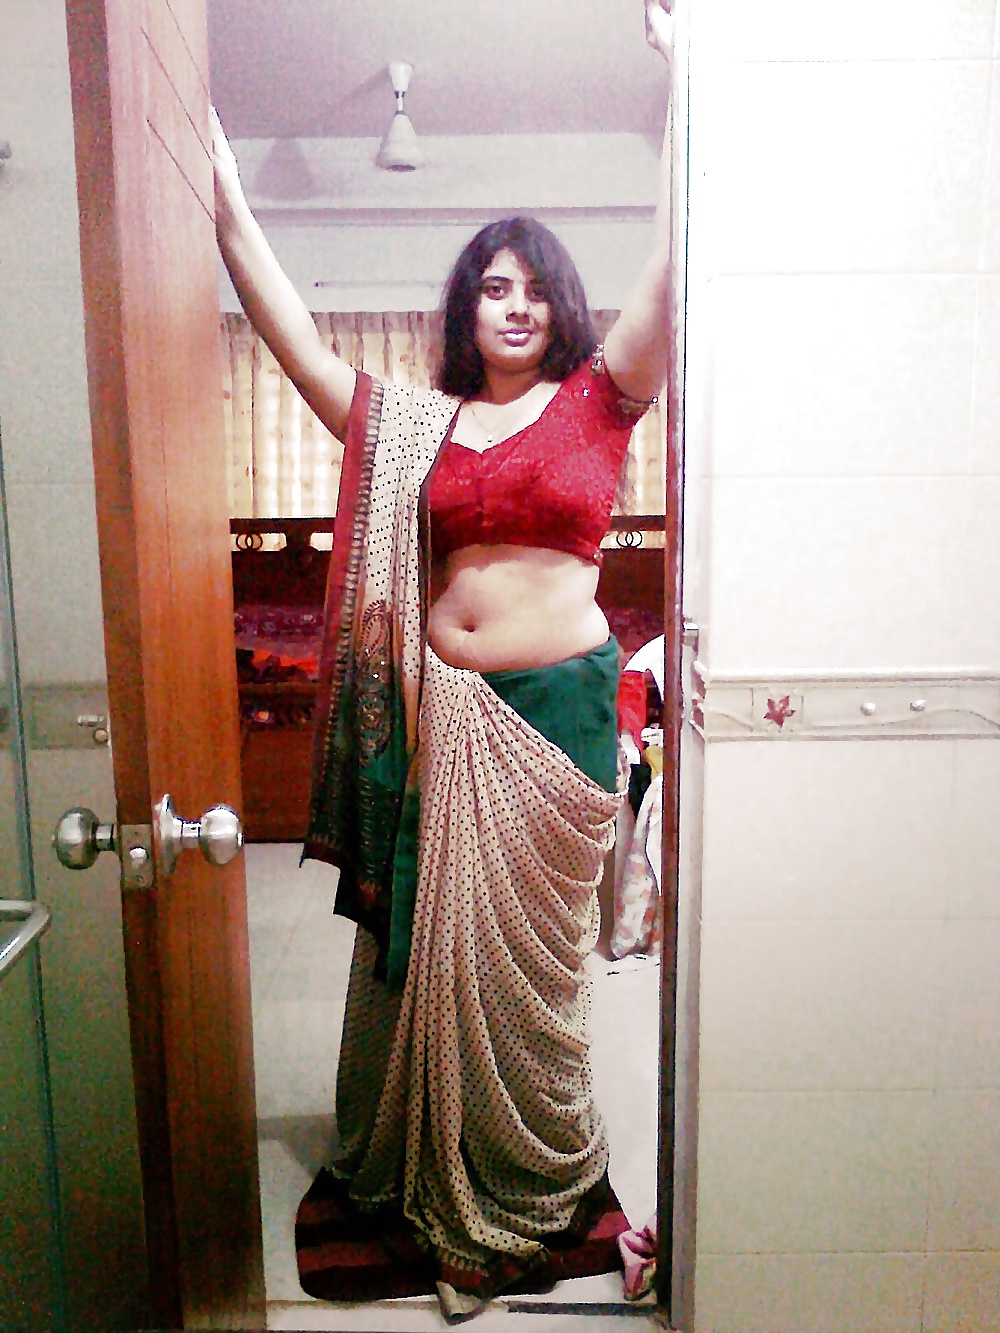 Women from India exposed #6 adult photos